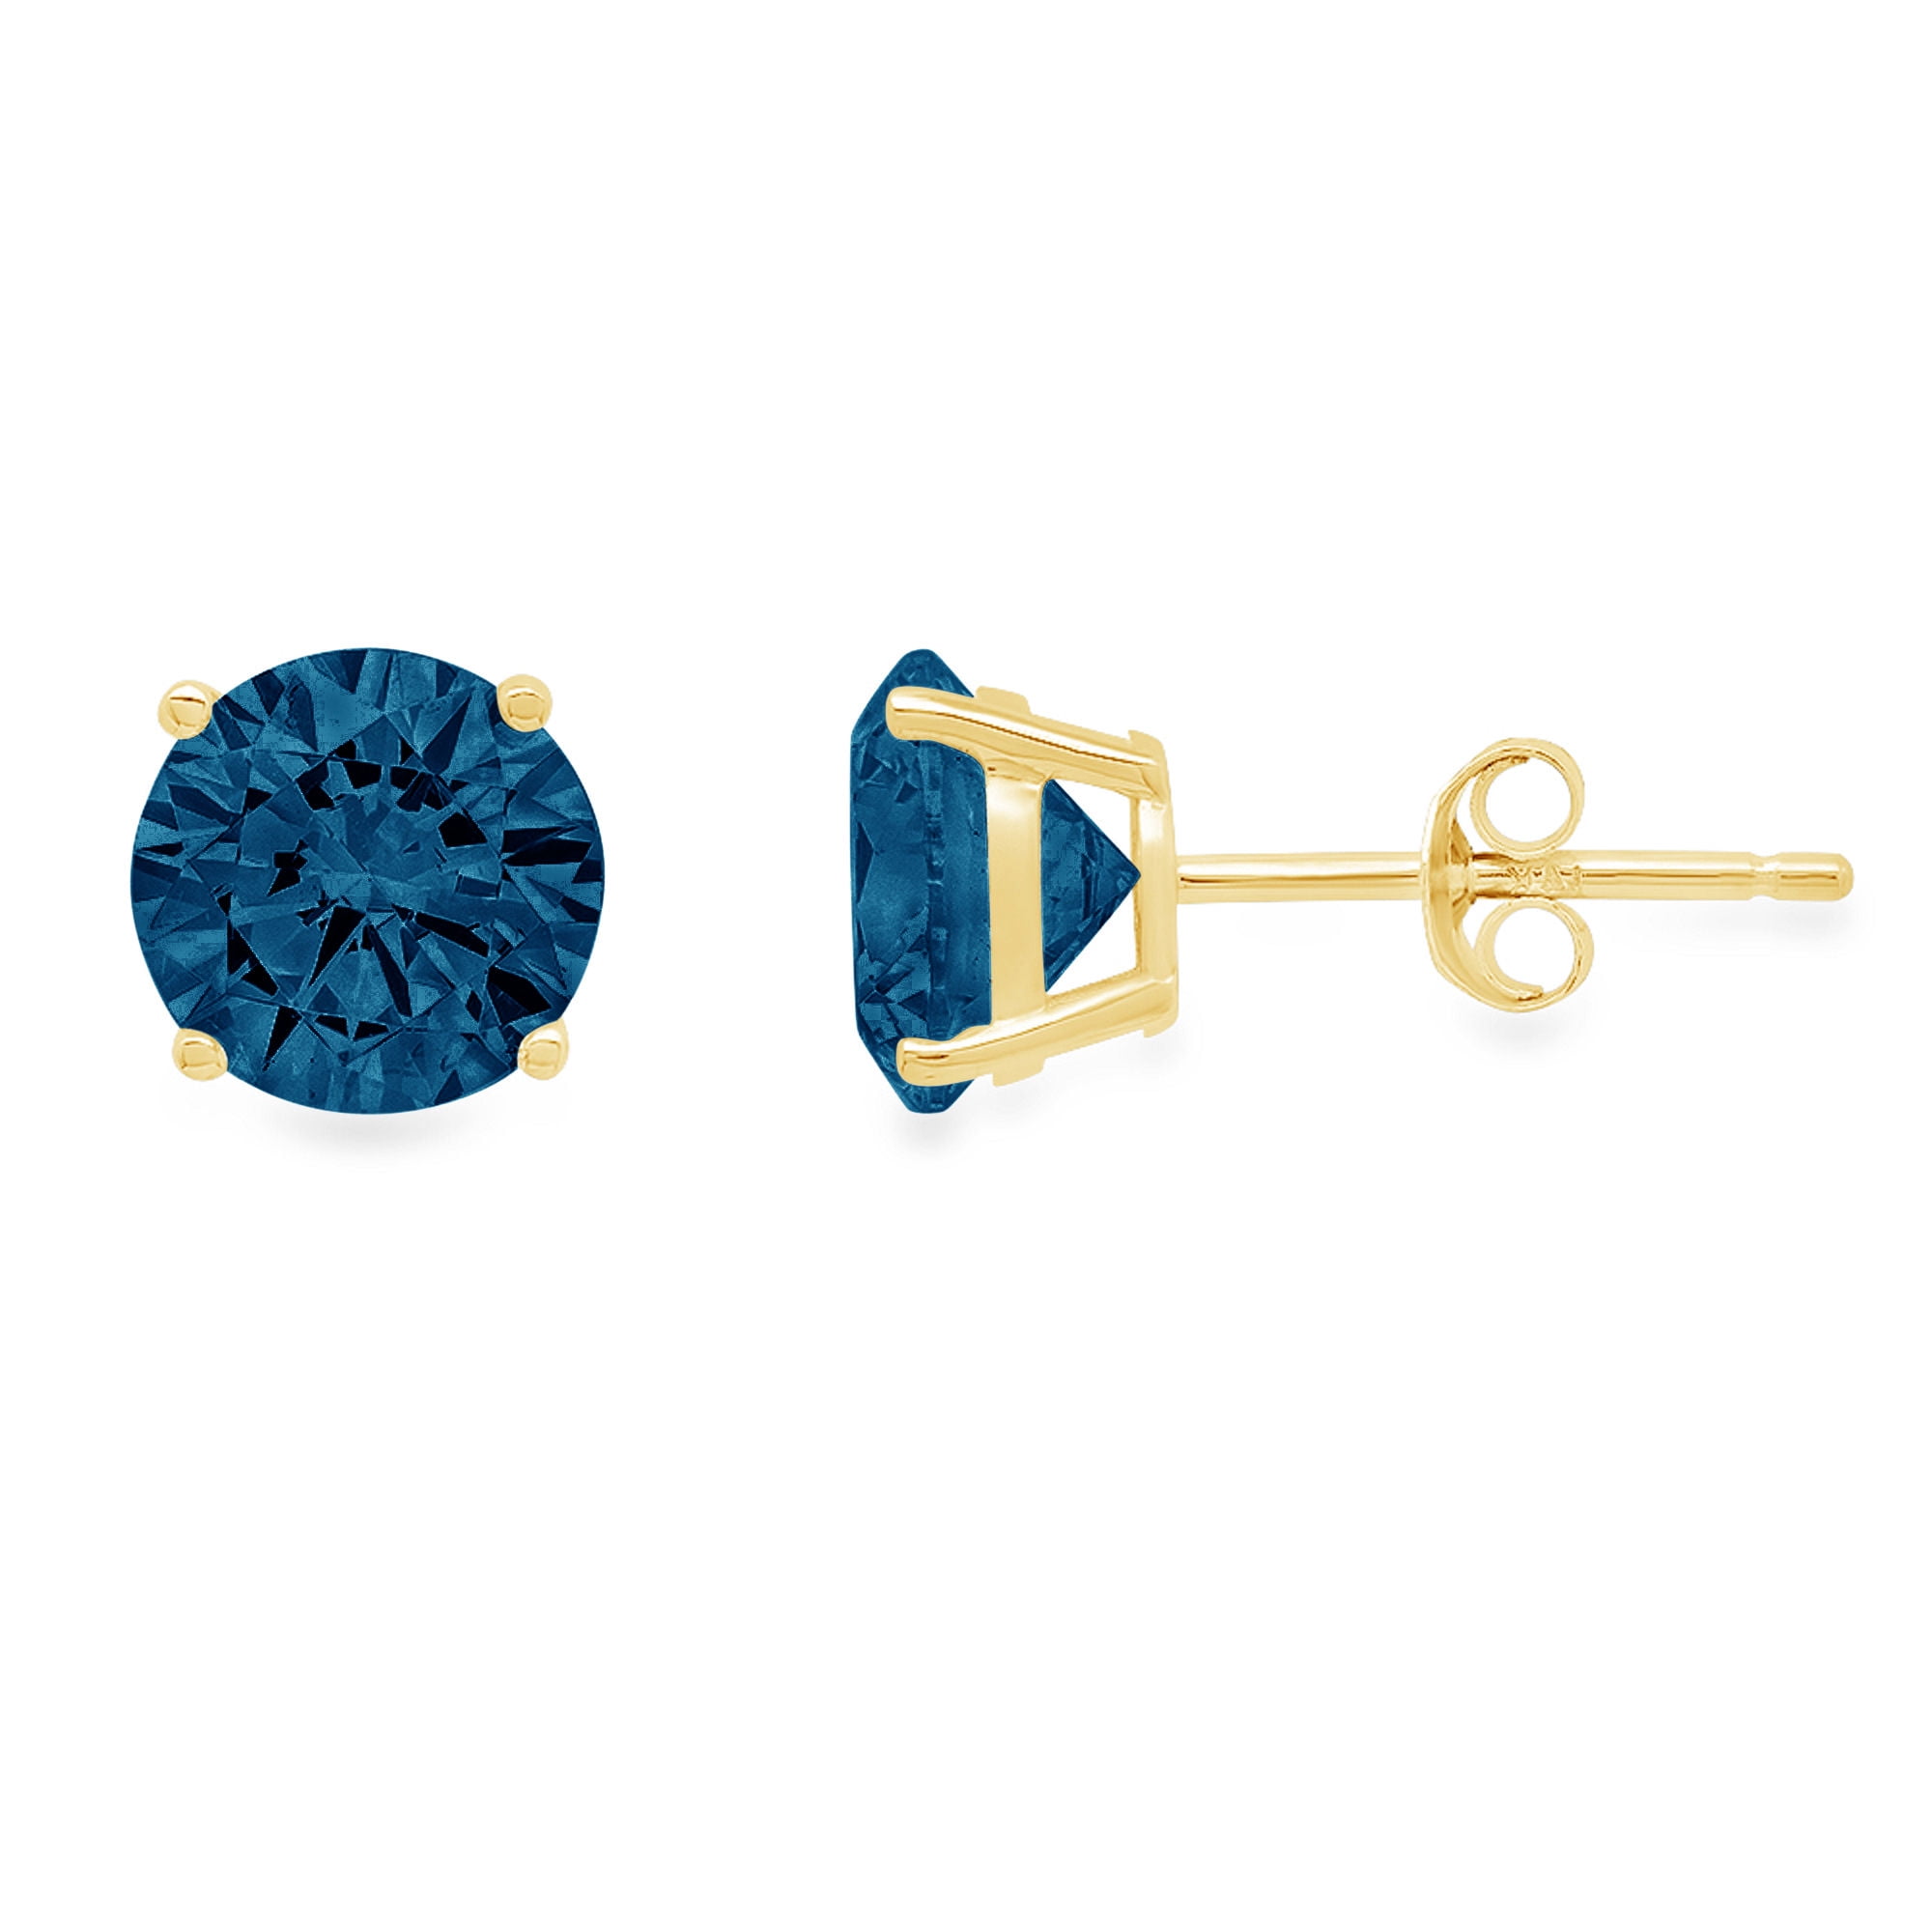 Details about   4 ct Round Solitaire Classic Stud Blue Topaz Earrings 14k Yellow Gold Push Back